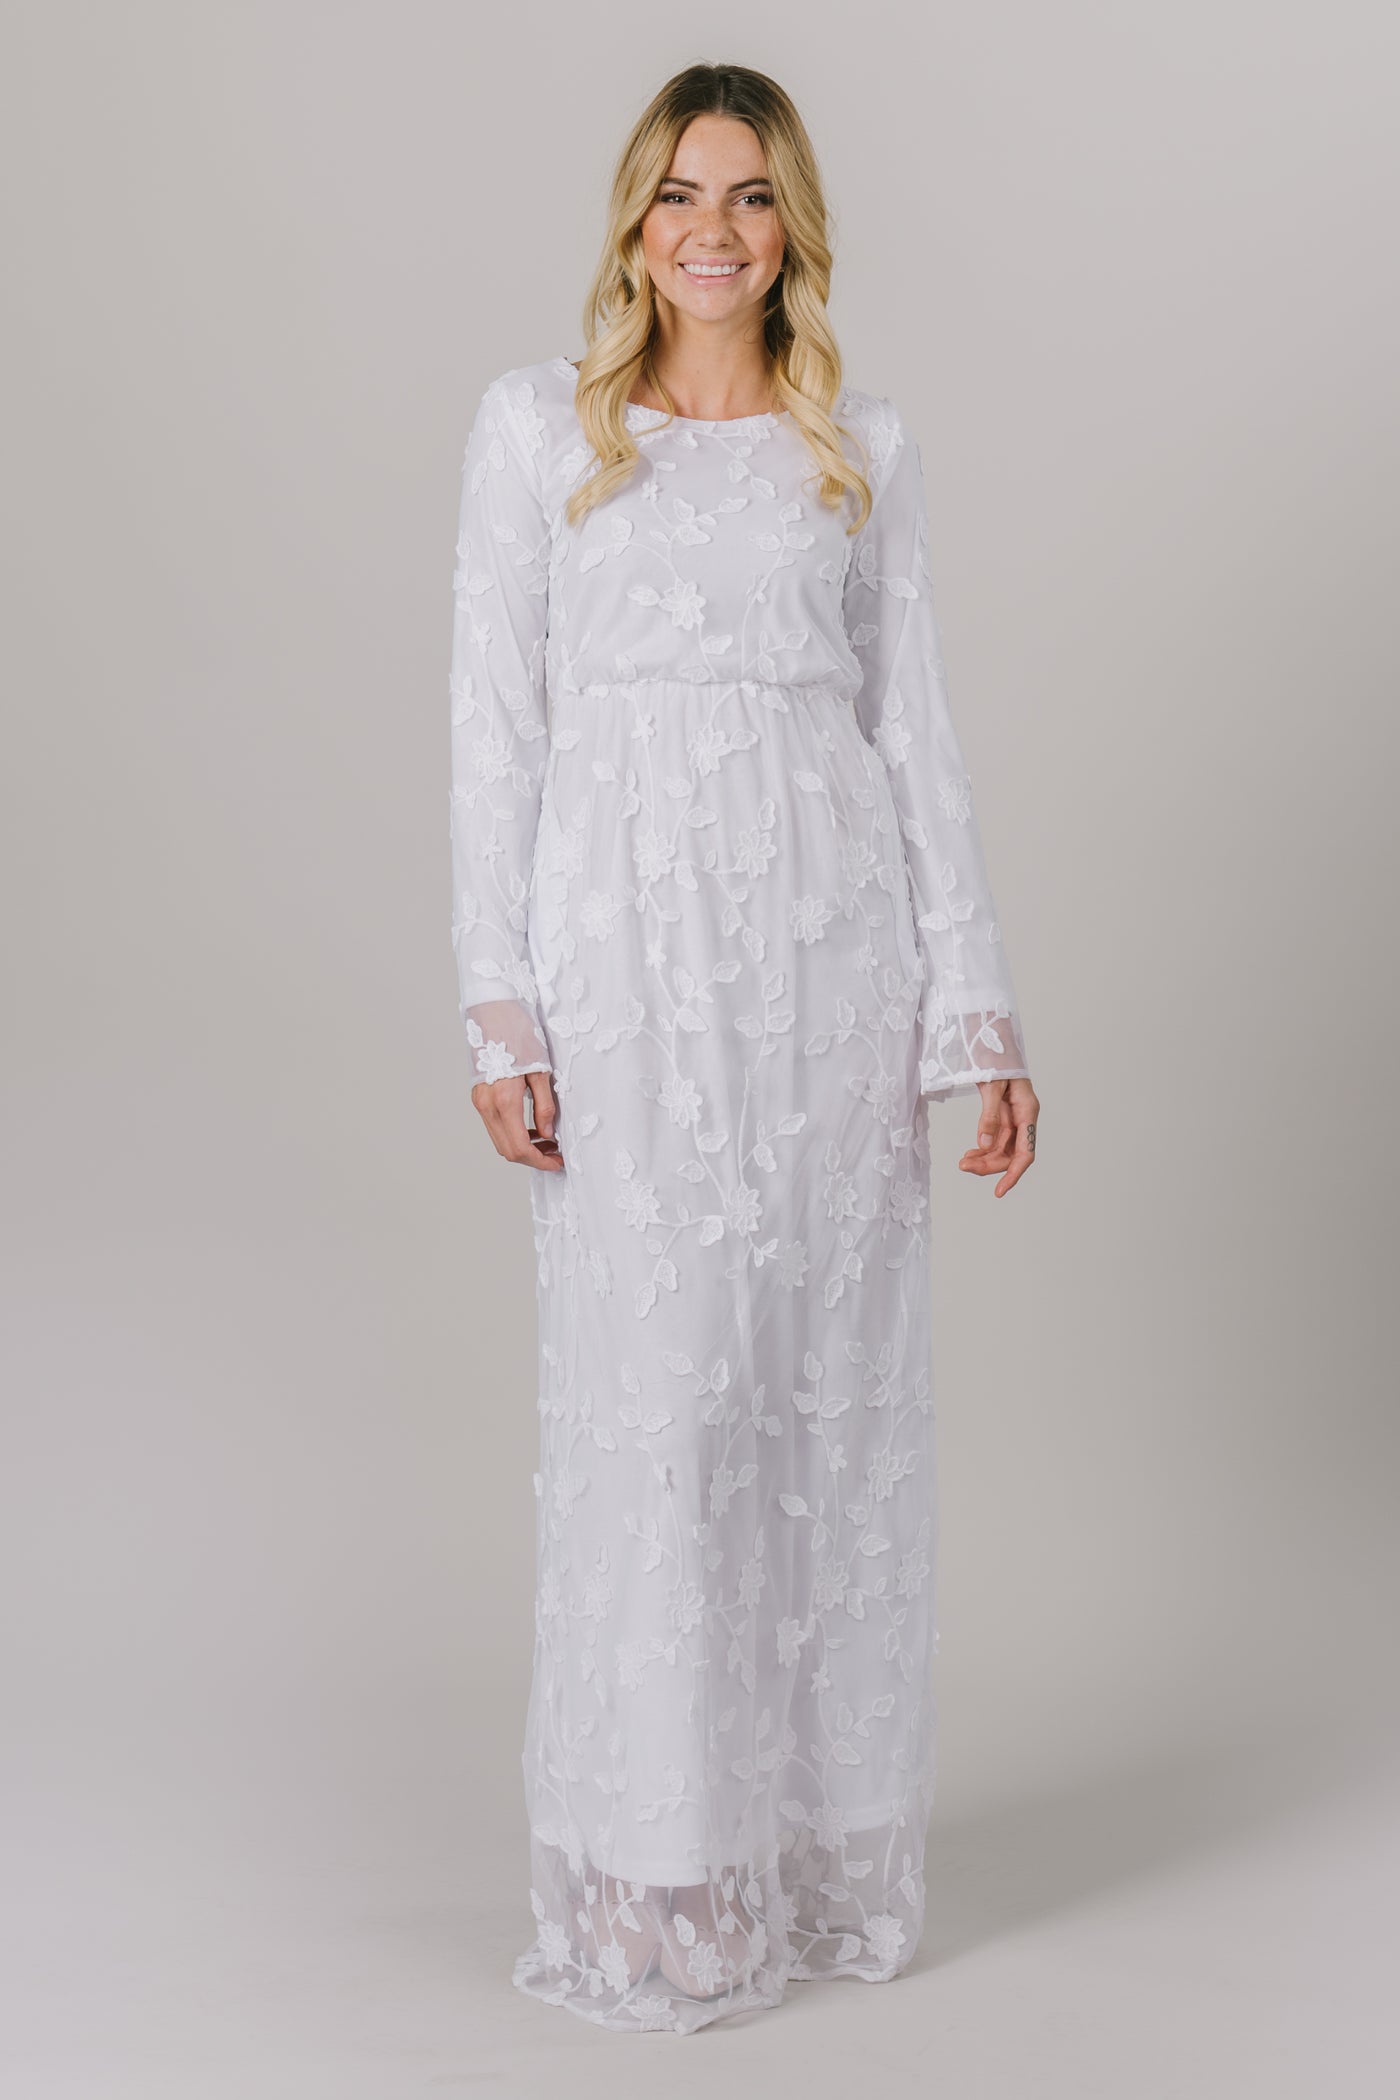 This LDS temple dress features a fully lined, floral lace with a cinched waistband and flowy long sleeves. It includes two pockets.